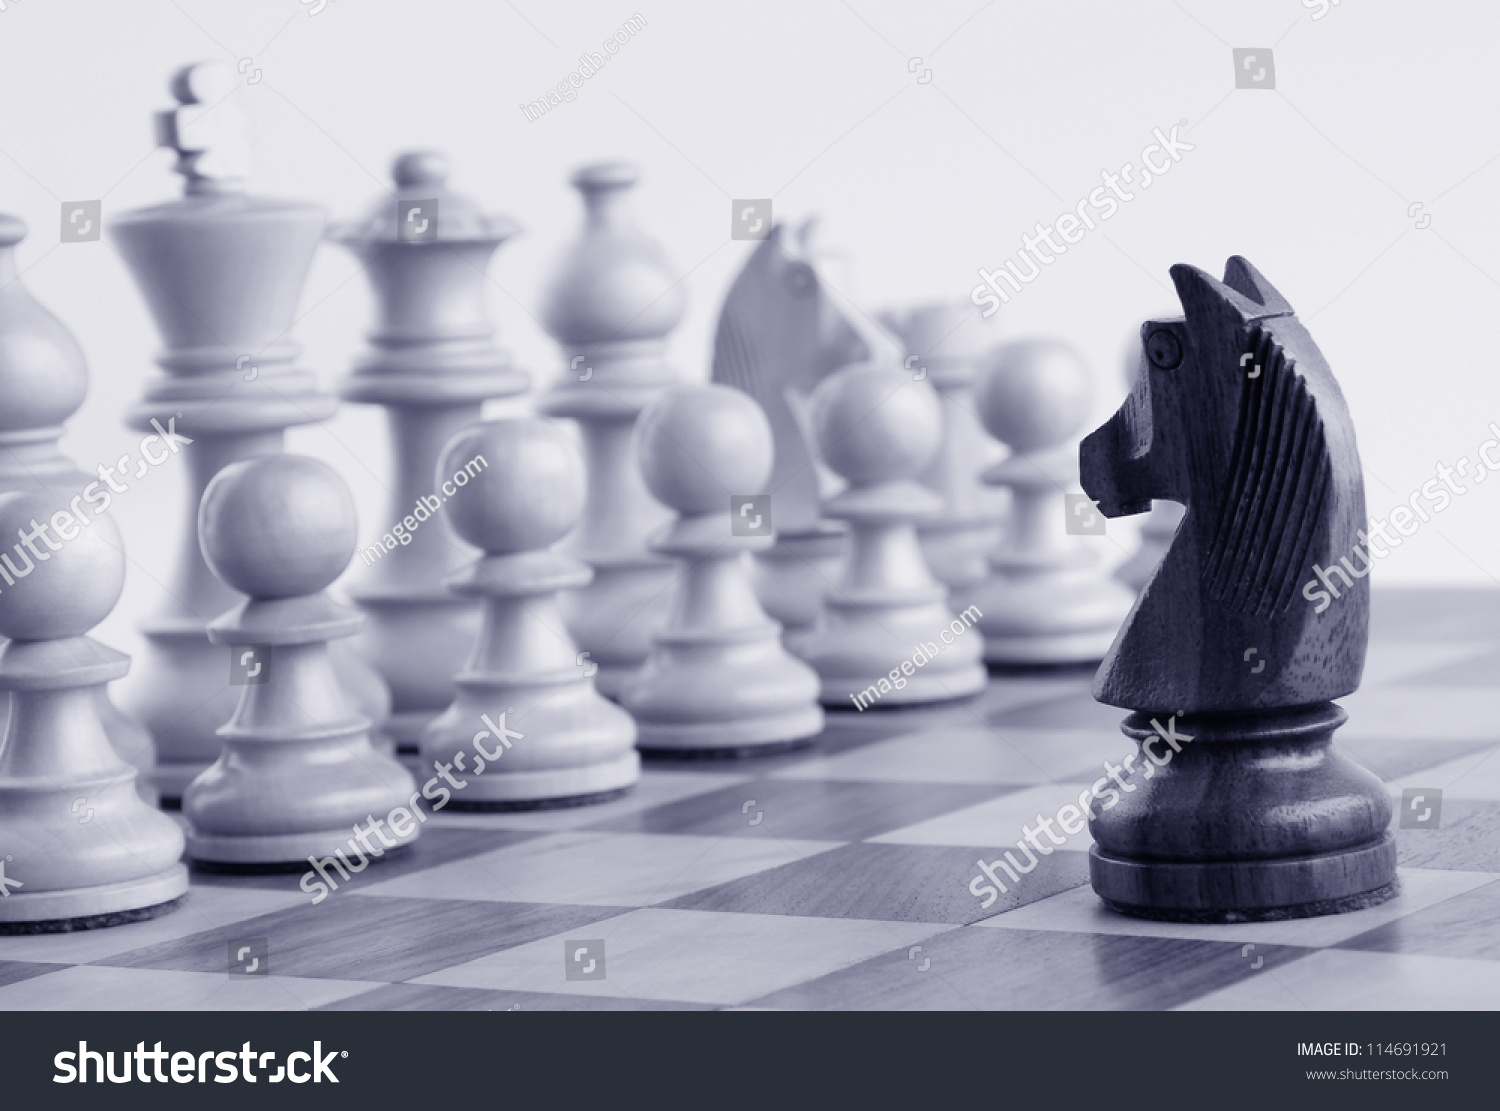 stock-photo-black-knight-facing-white-chess-pieces-on-a-chess-board-114691921.jpg